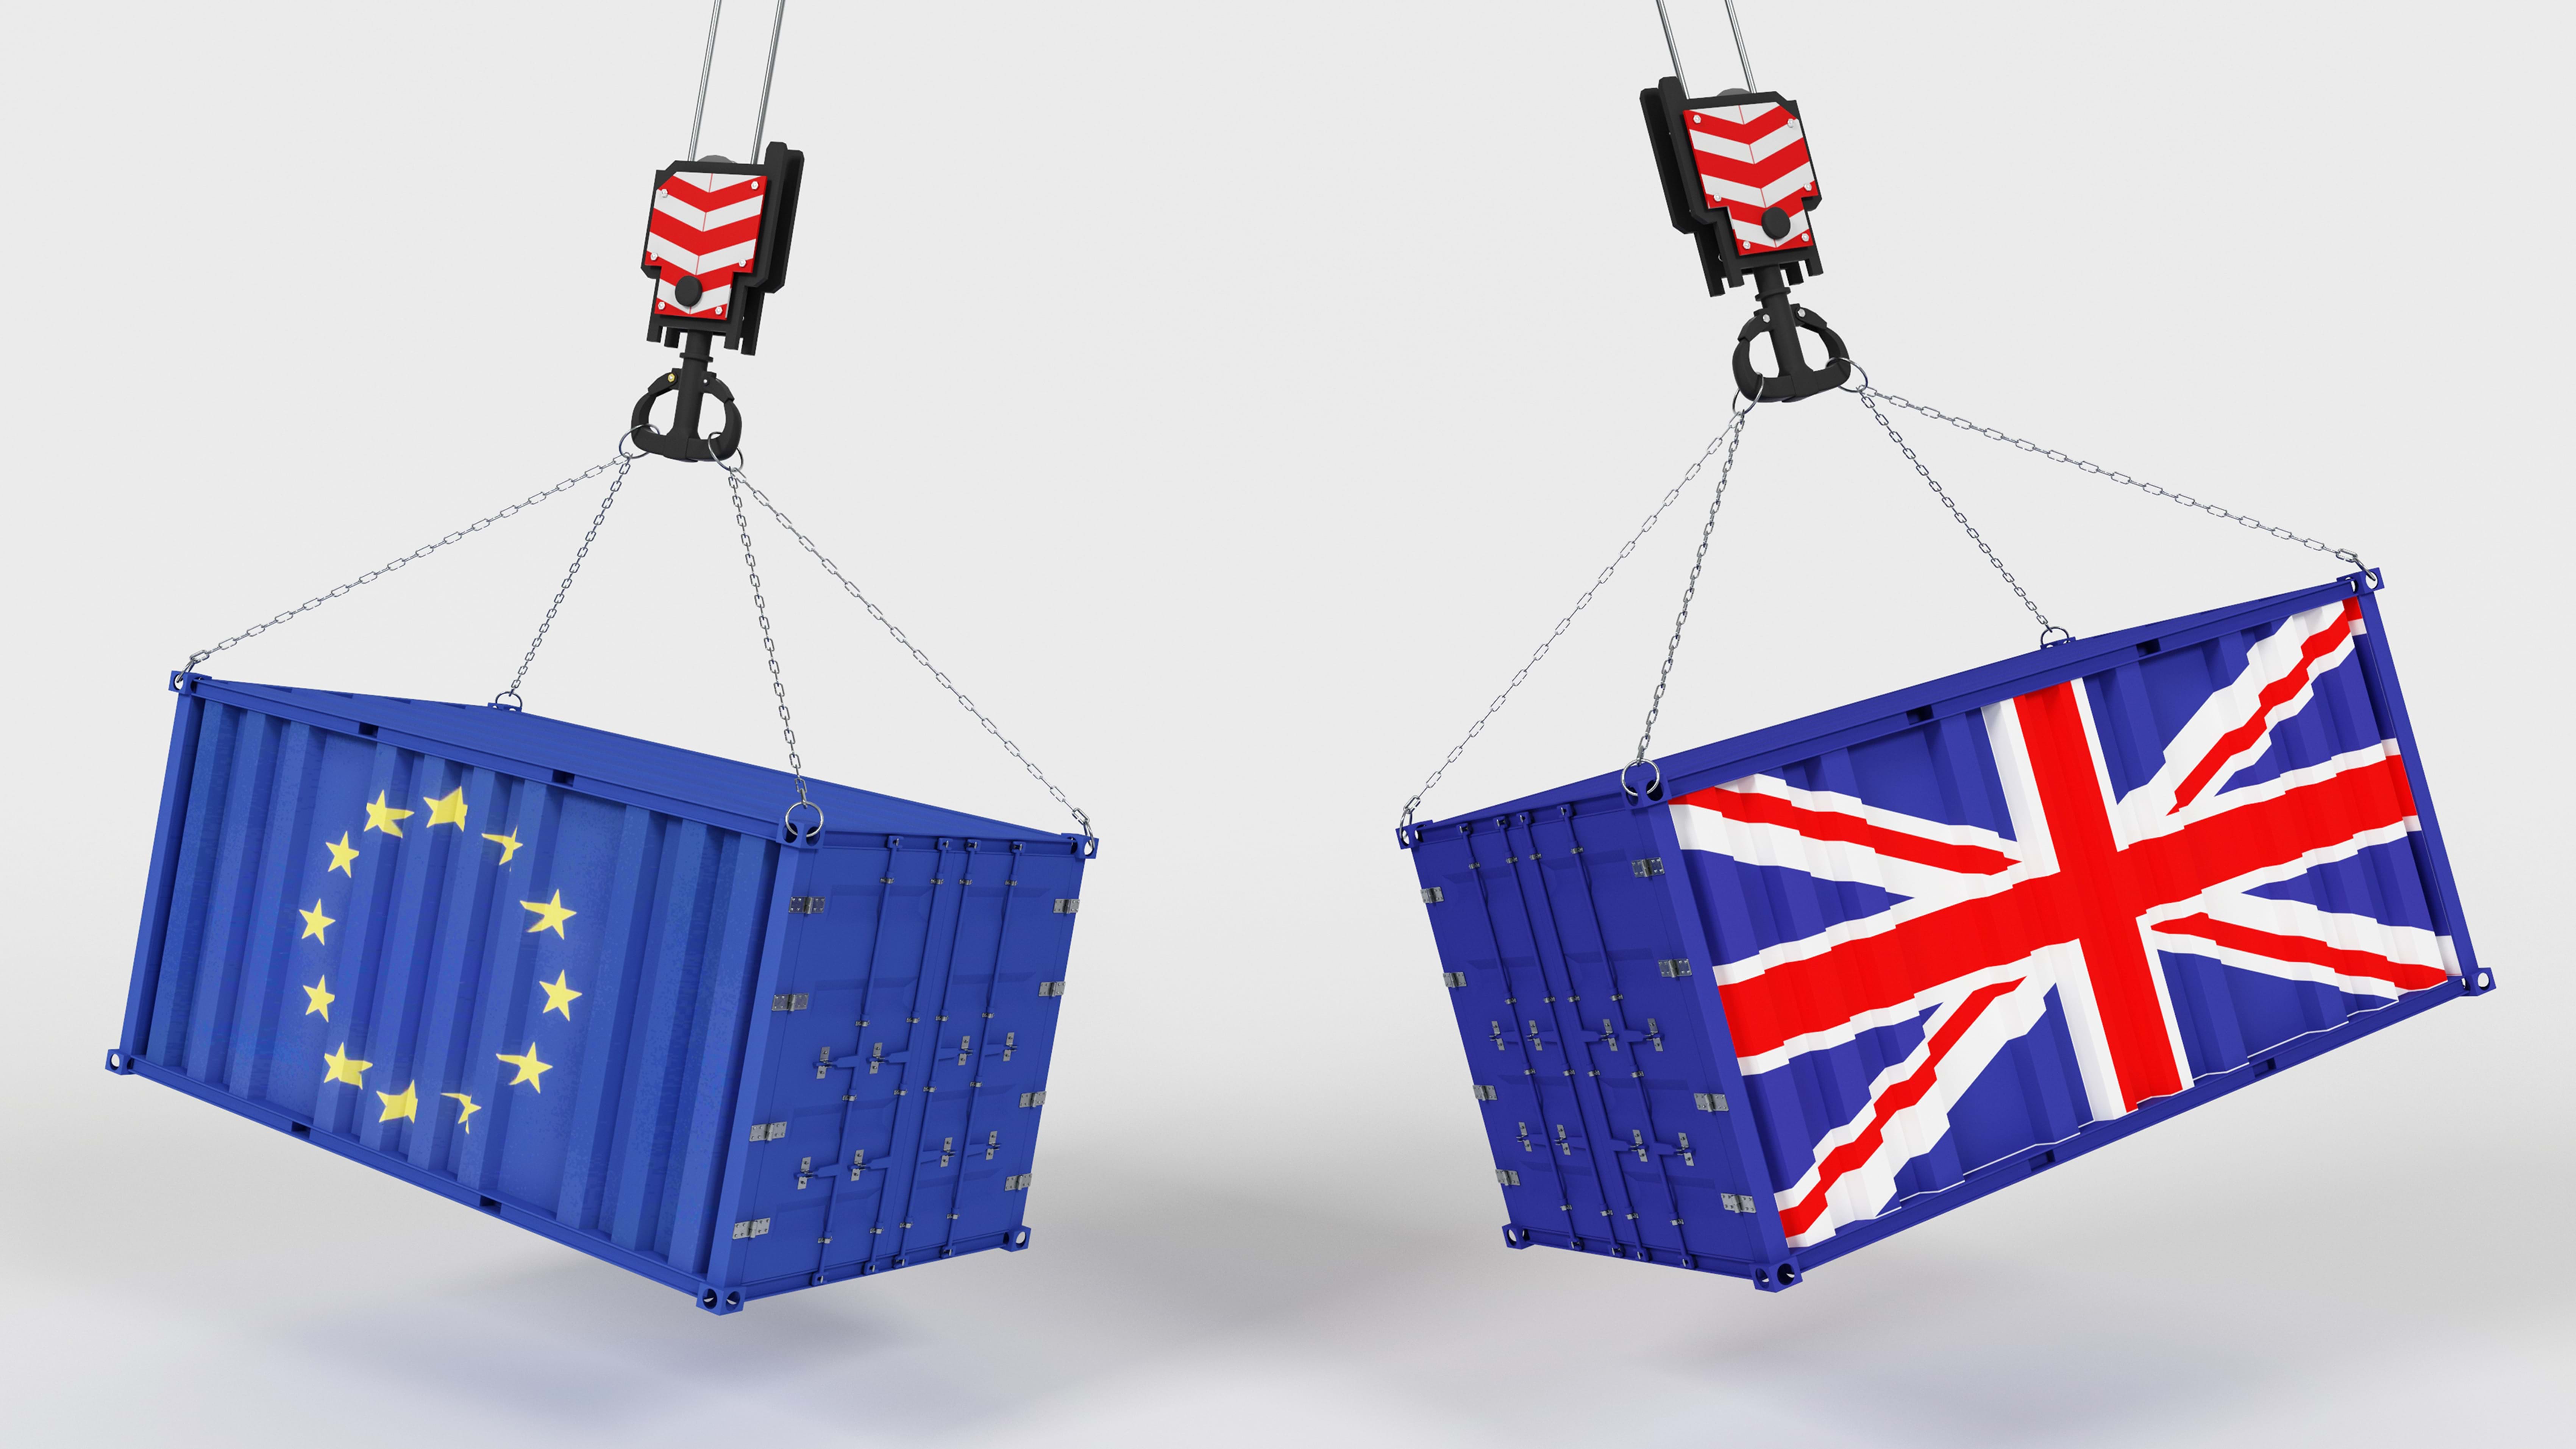 Two freight containers, one showing the flag of Europe and the other showing the Union Jack flag